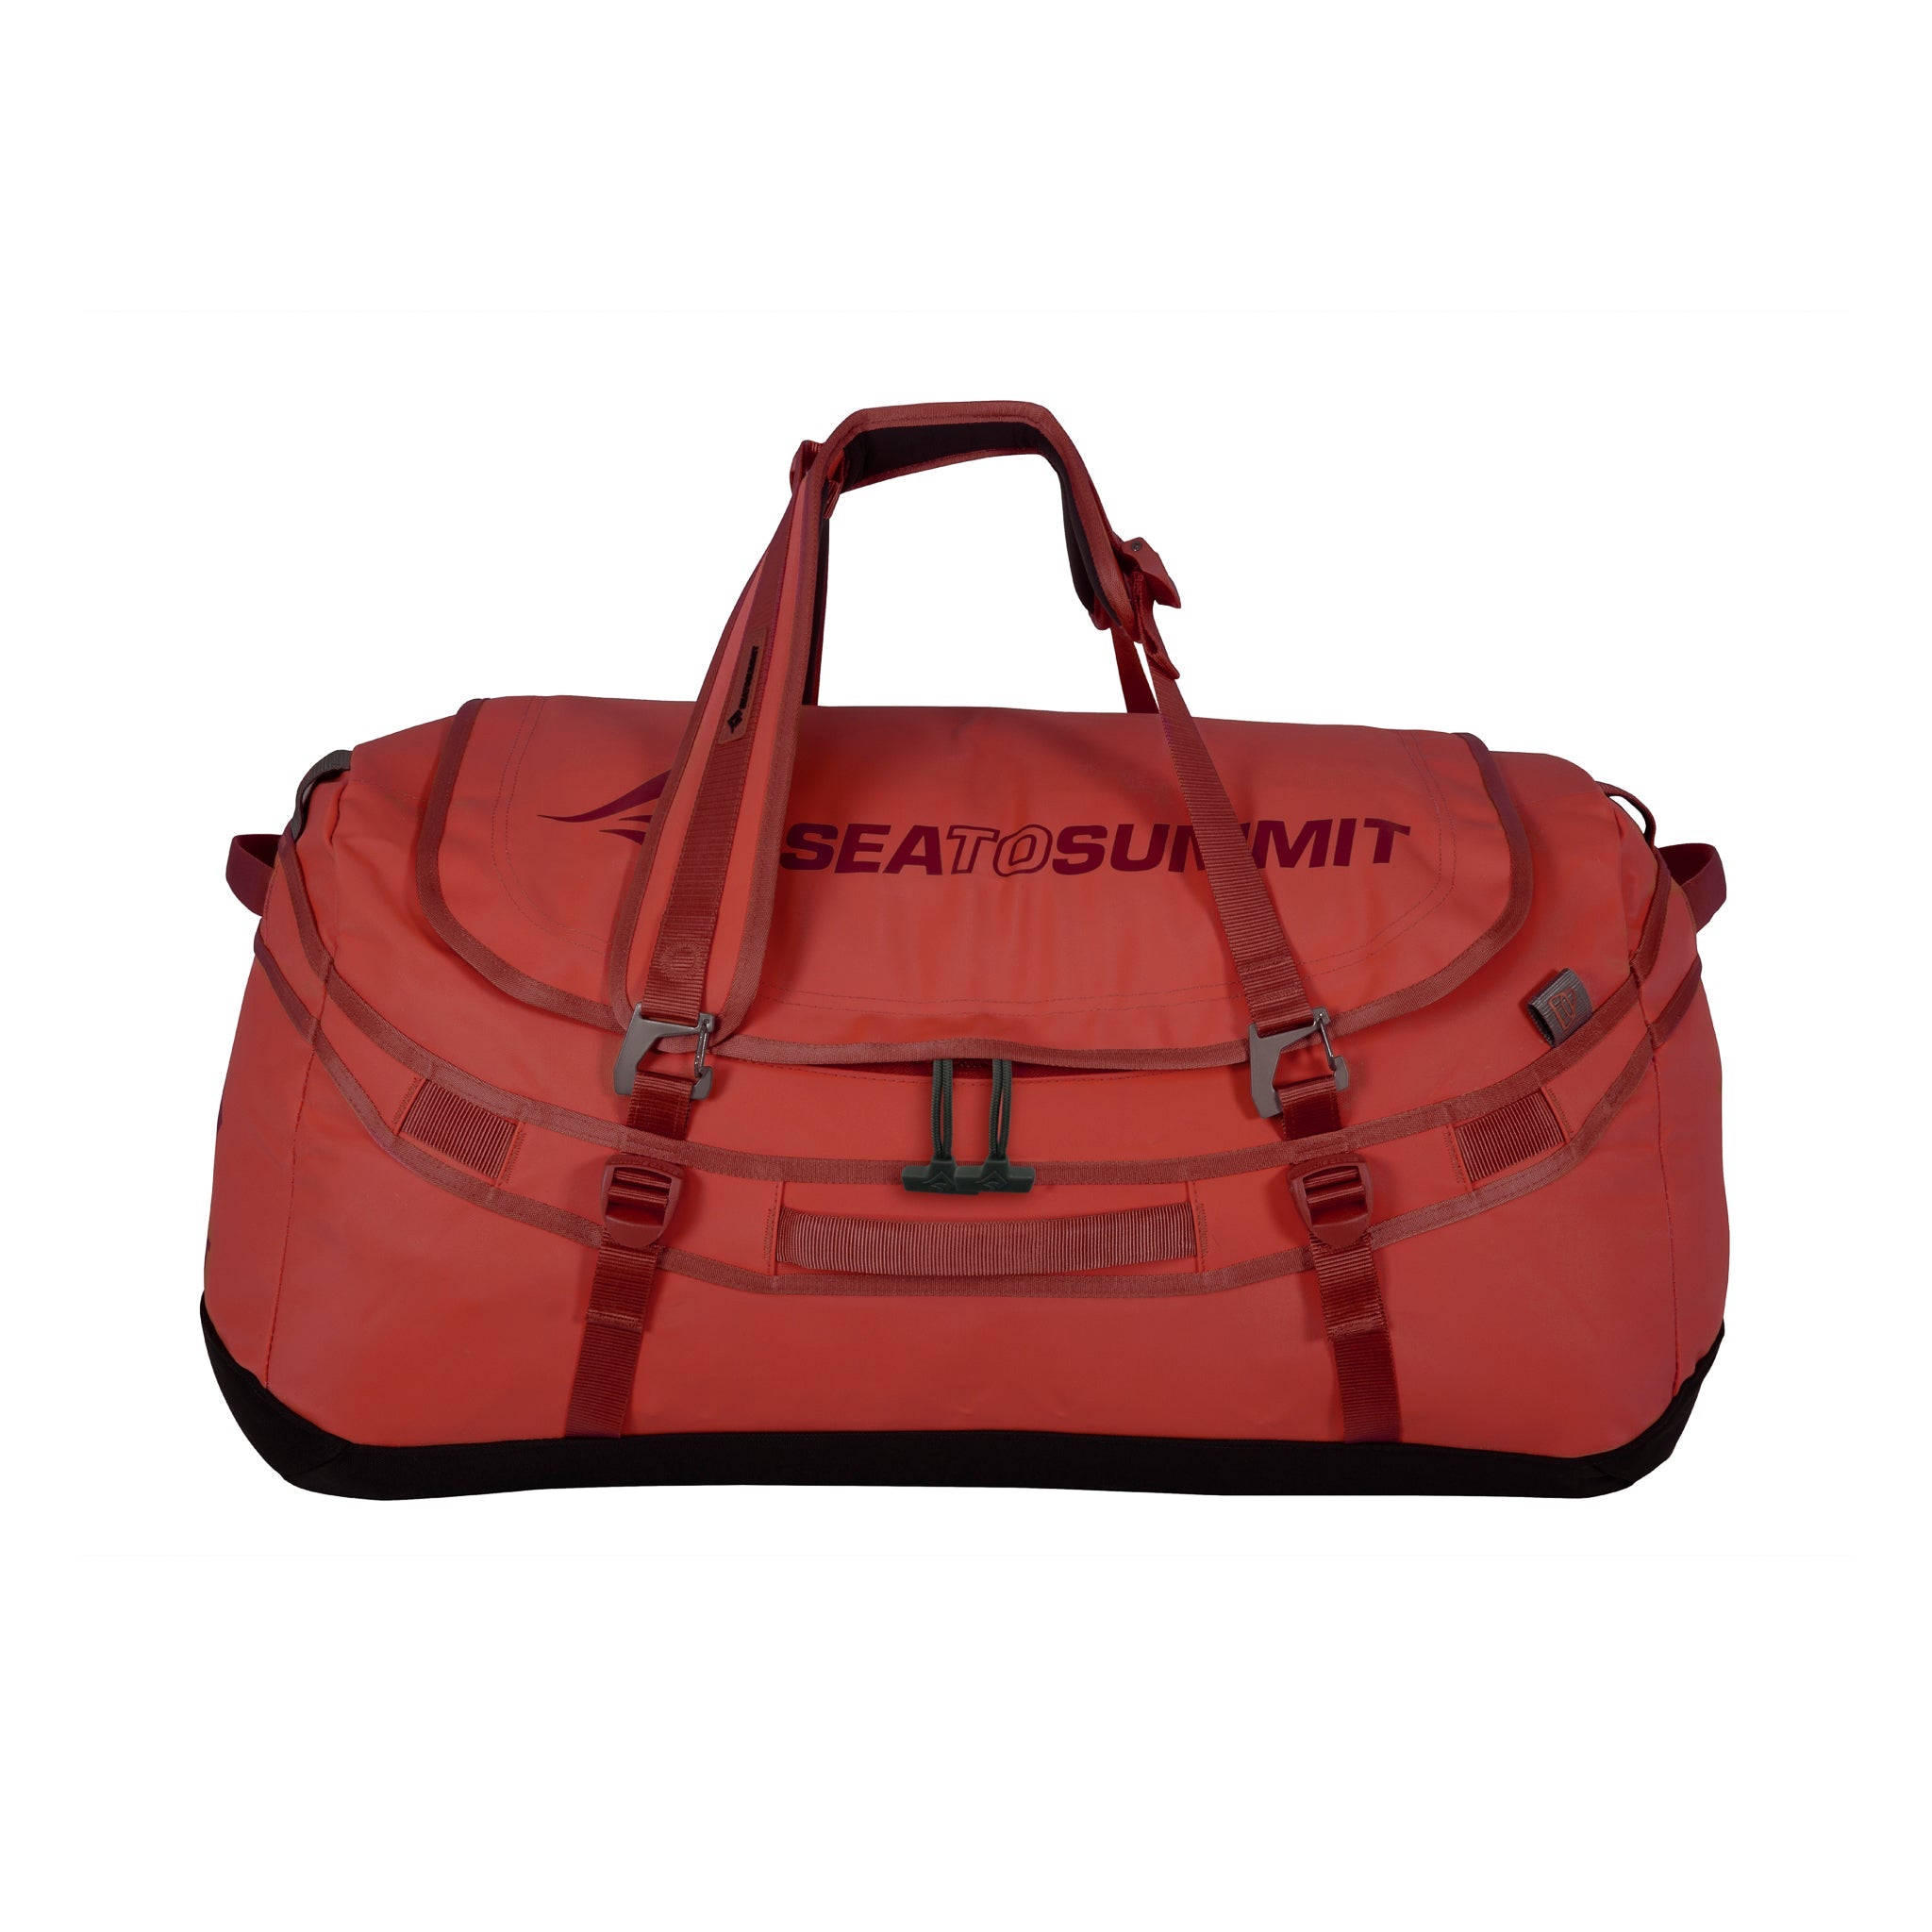 90 litre / Red || Sea to Summit Duffle Bag